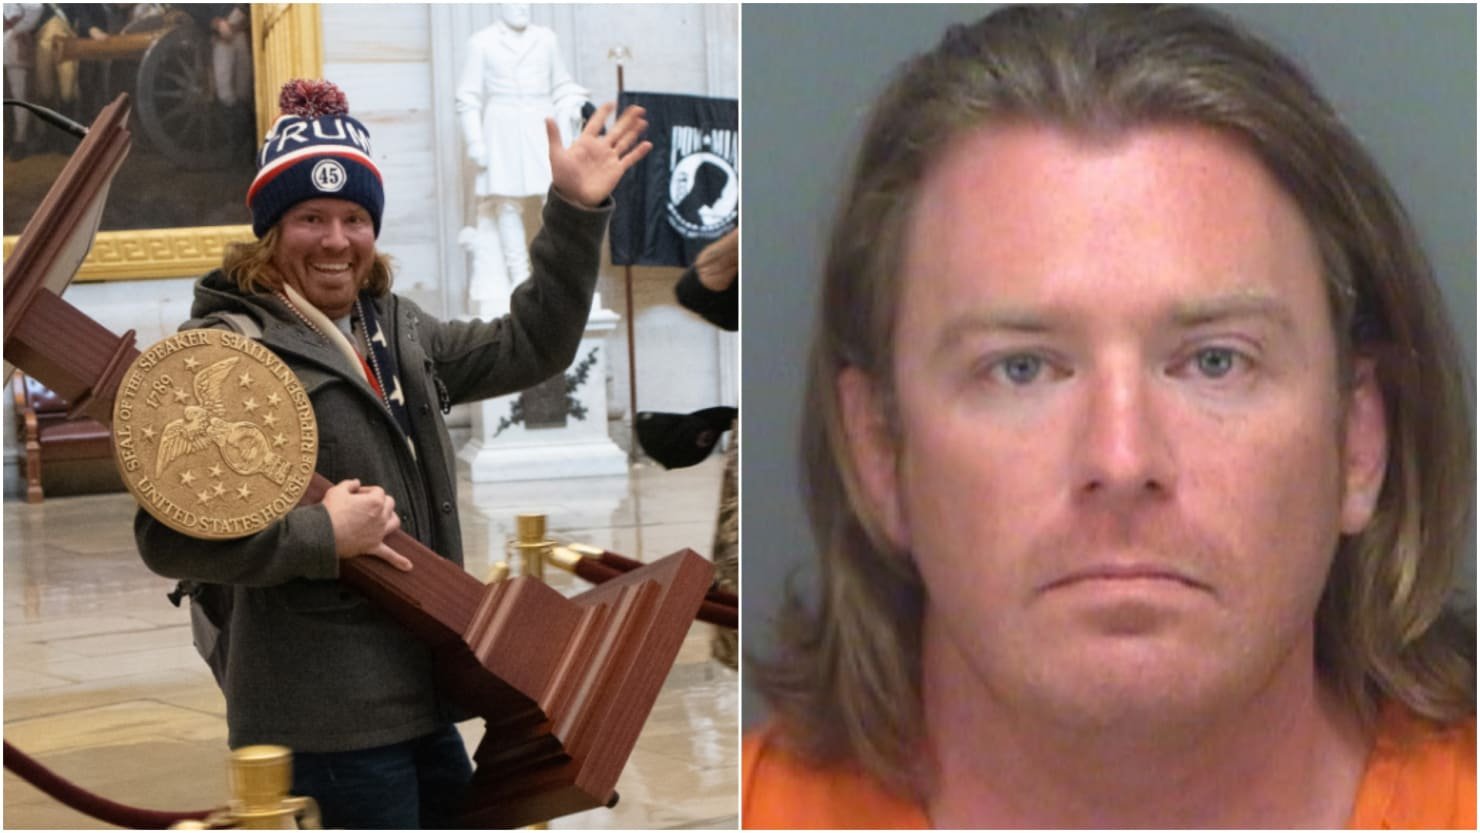 Feds Arrest Grinning Dad Photographed With Pelosi’s Lectern, Horn-Wearing QAnon Shaman After Capitol Riot